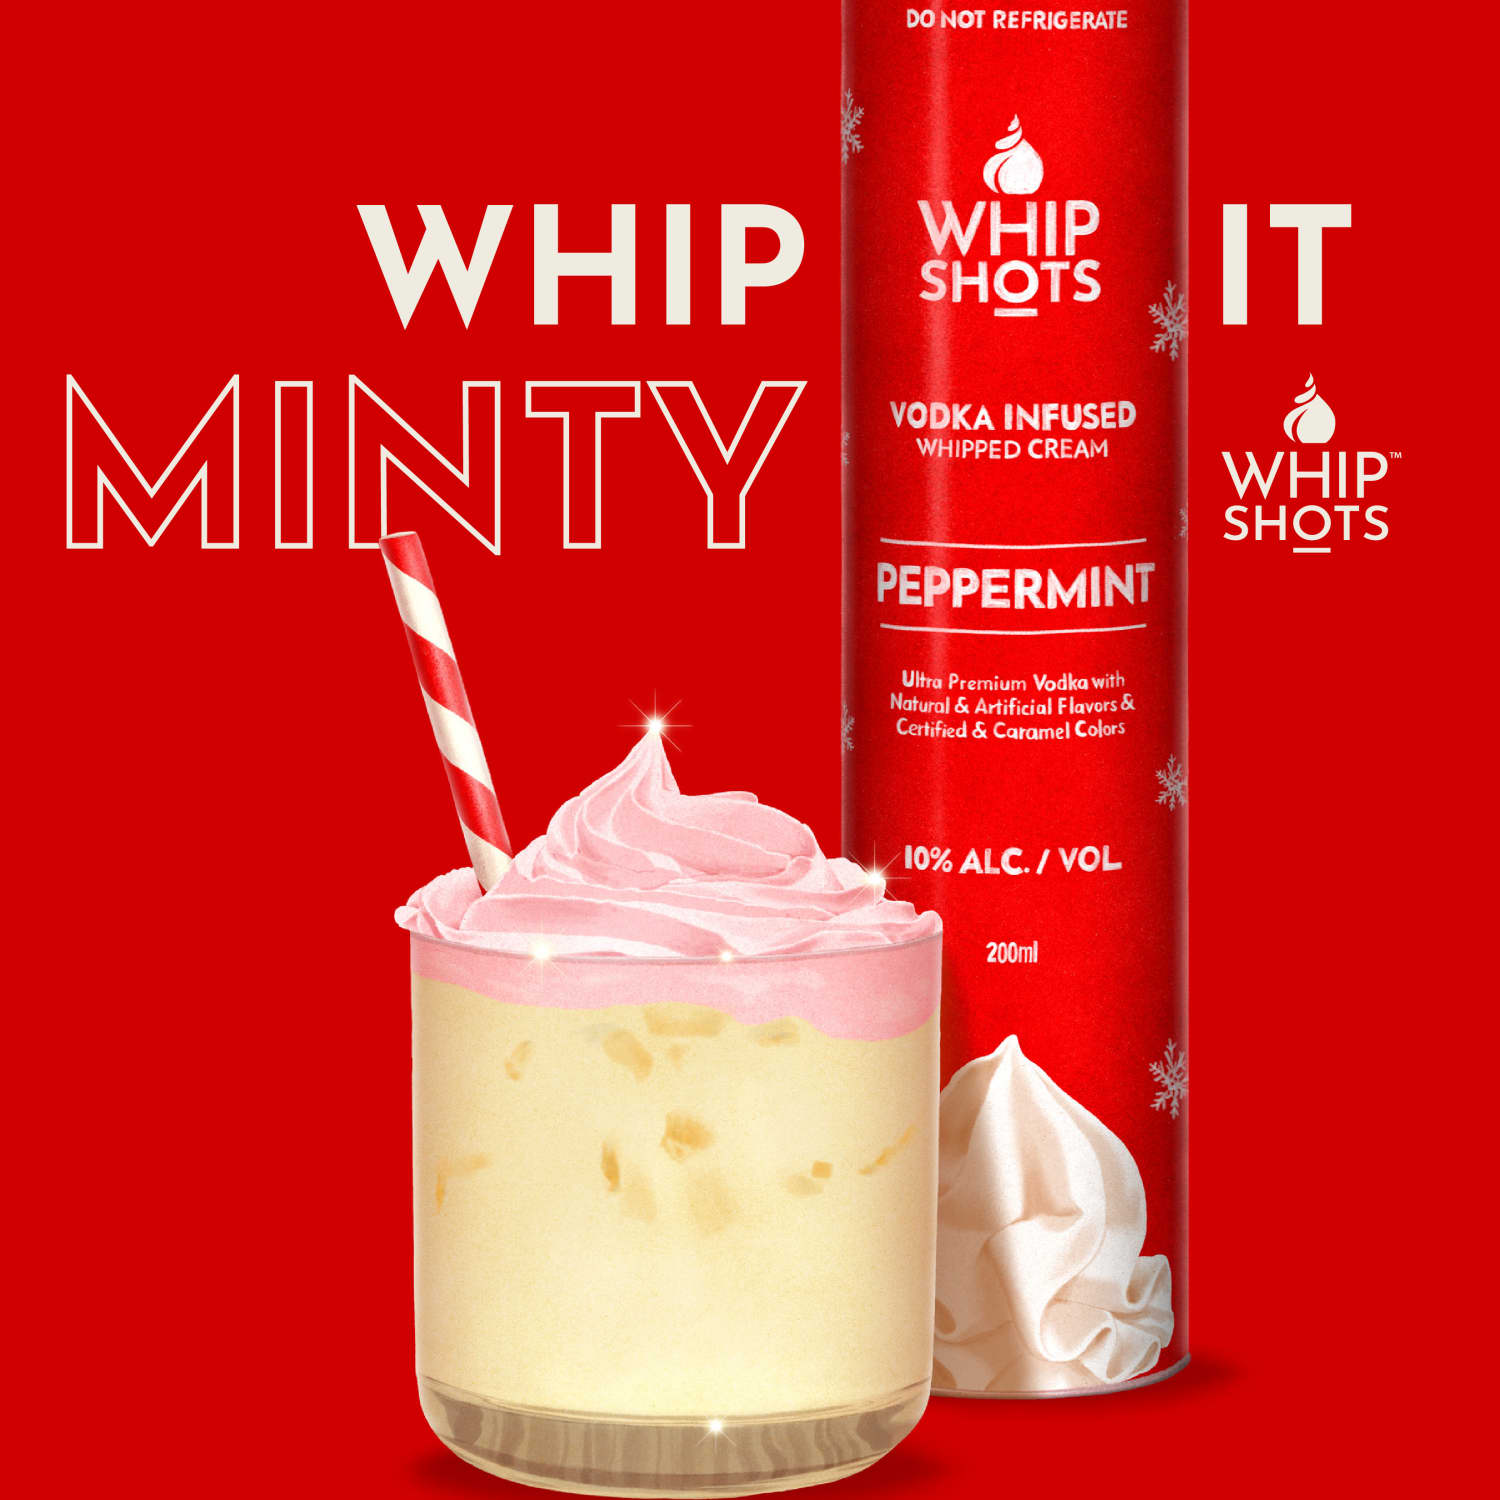 Cardi B's Boozy Whipped Cream Now Comes in a Seasonal Peppermint Flavor